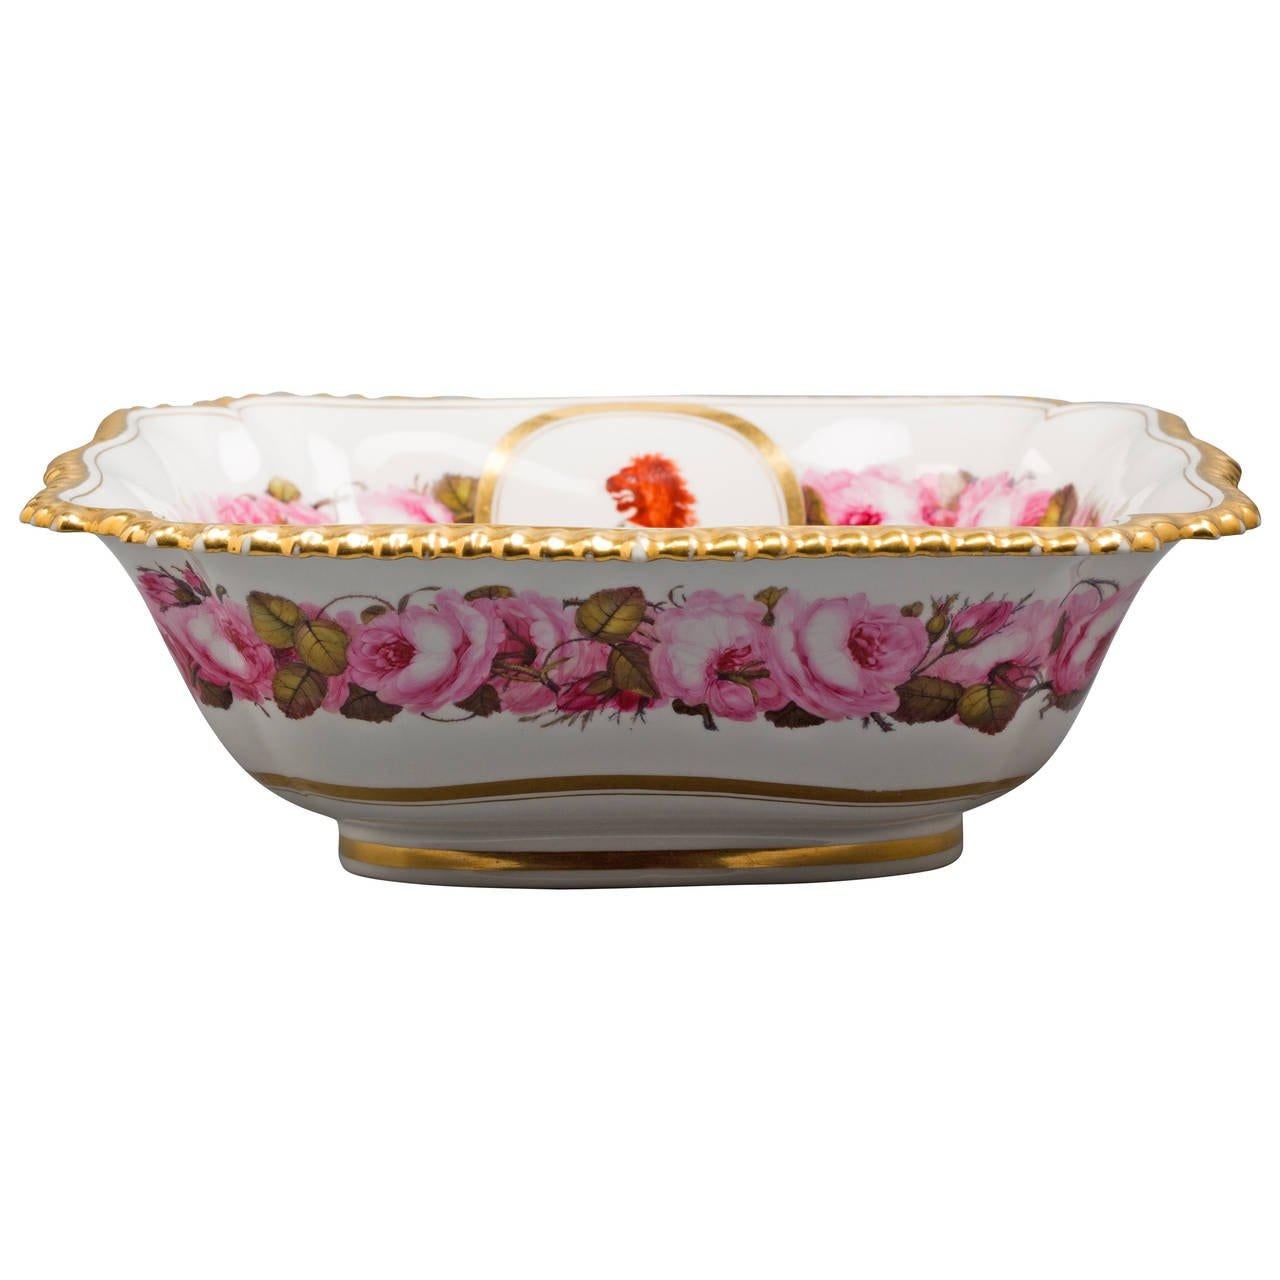 19th Century English Porcelain Bowl, Flight Barr and Barr, circa 1820 For Sale